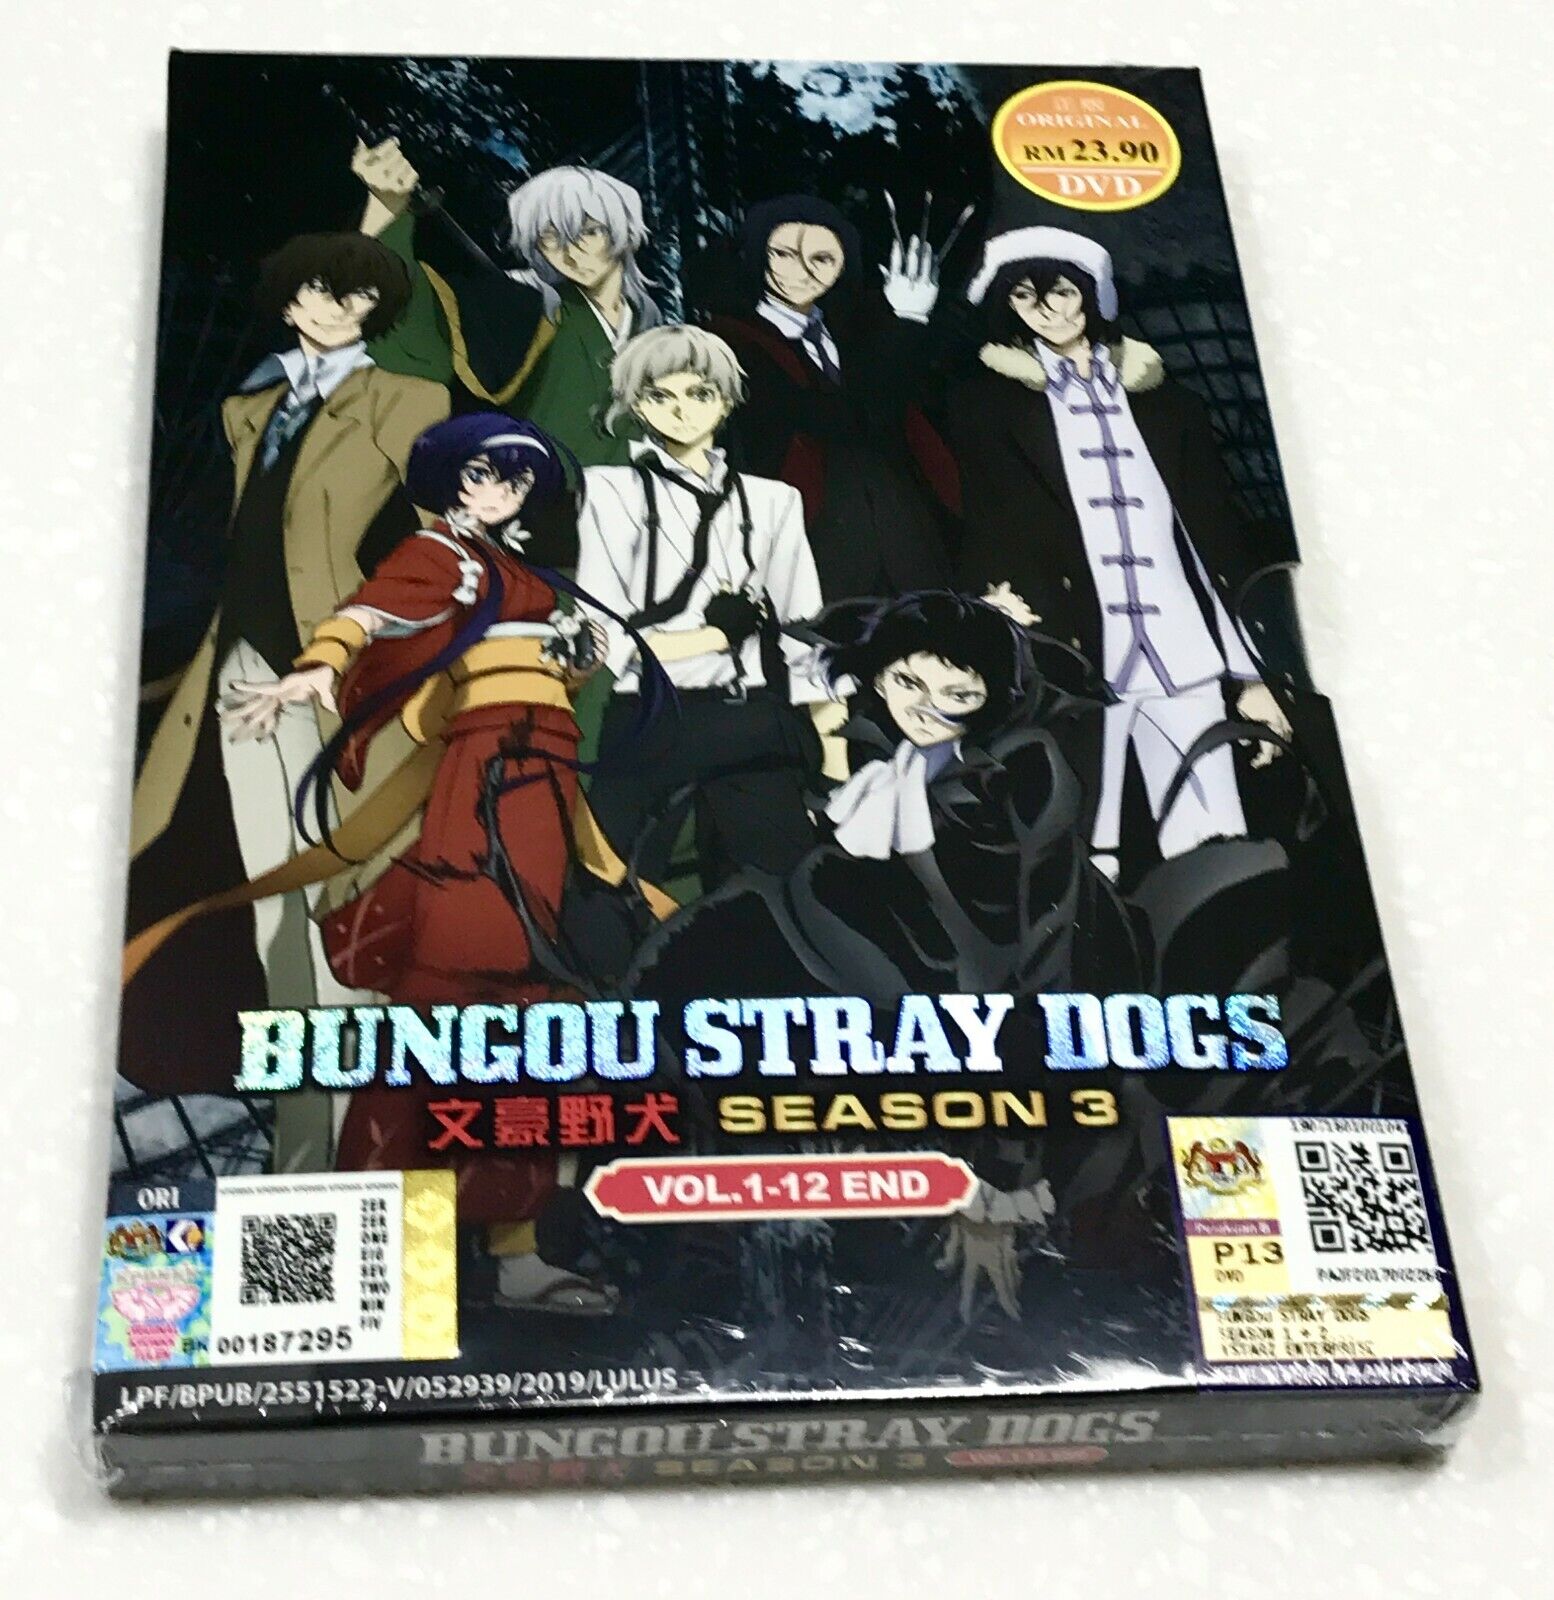 DVD Anime Bungou Stray Dogs Season 3 Vol 1-12 End English Japanese Version  for sale online